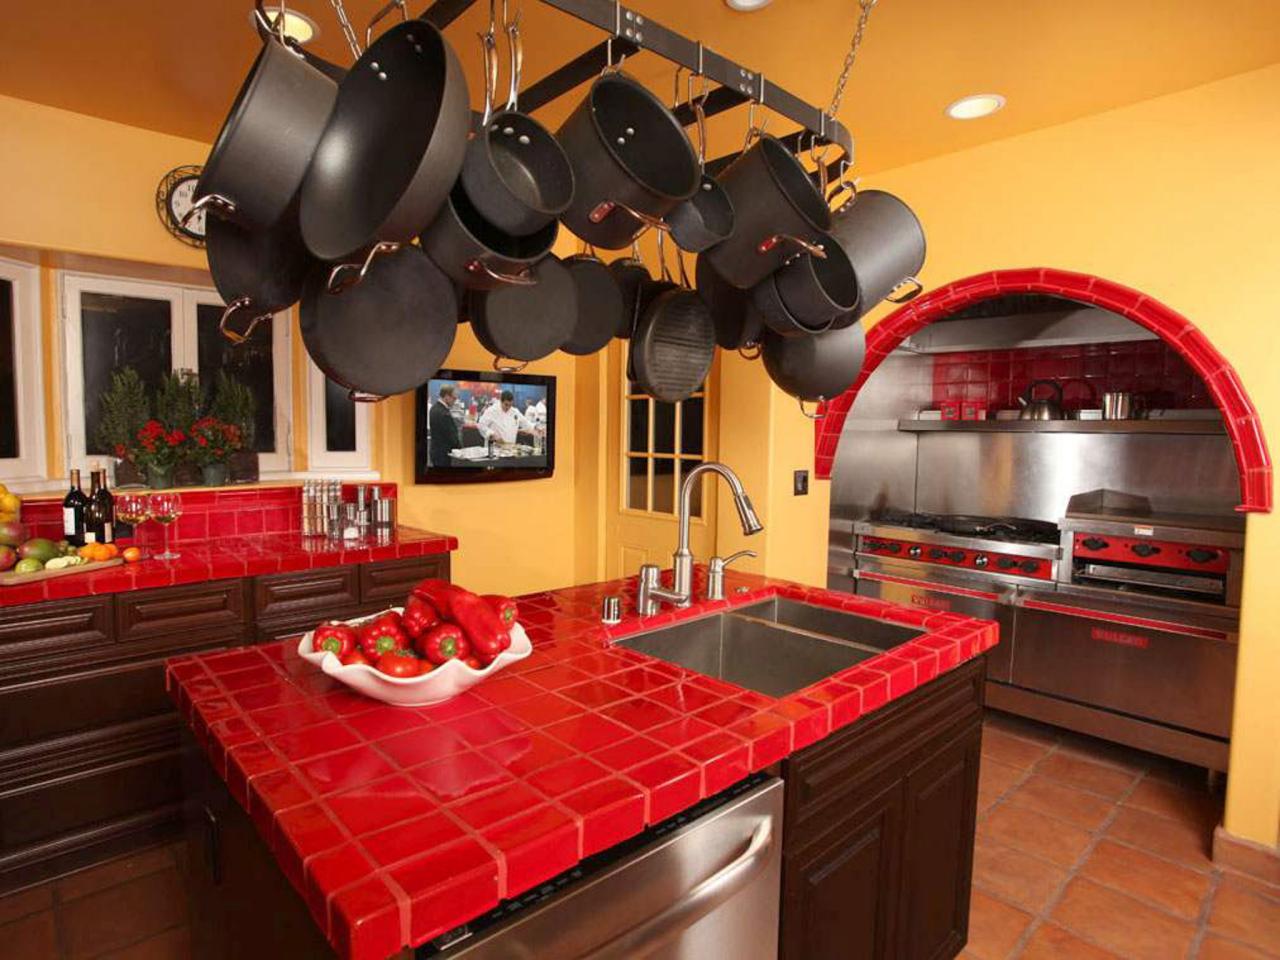 Tiled Kitchen Countertops, Red Formica Kitchen Countertops